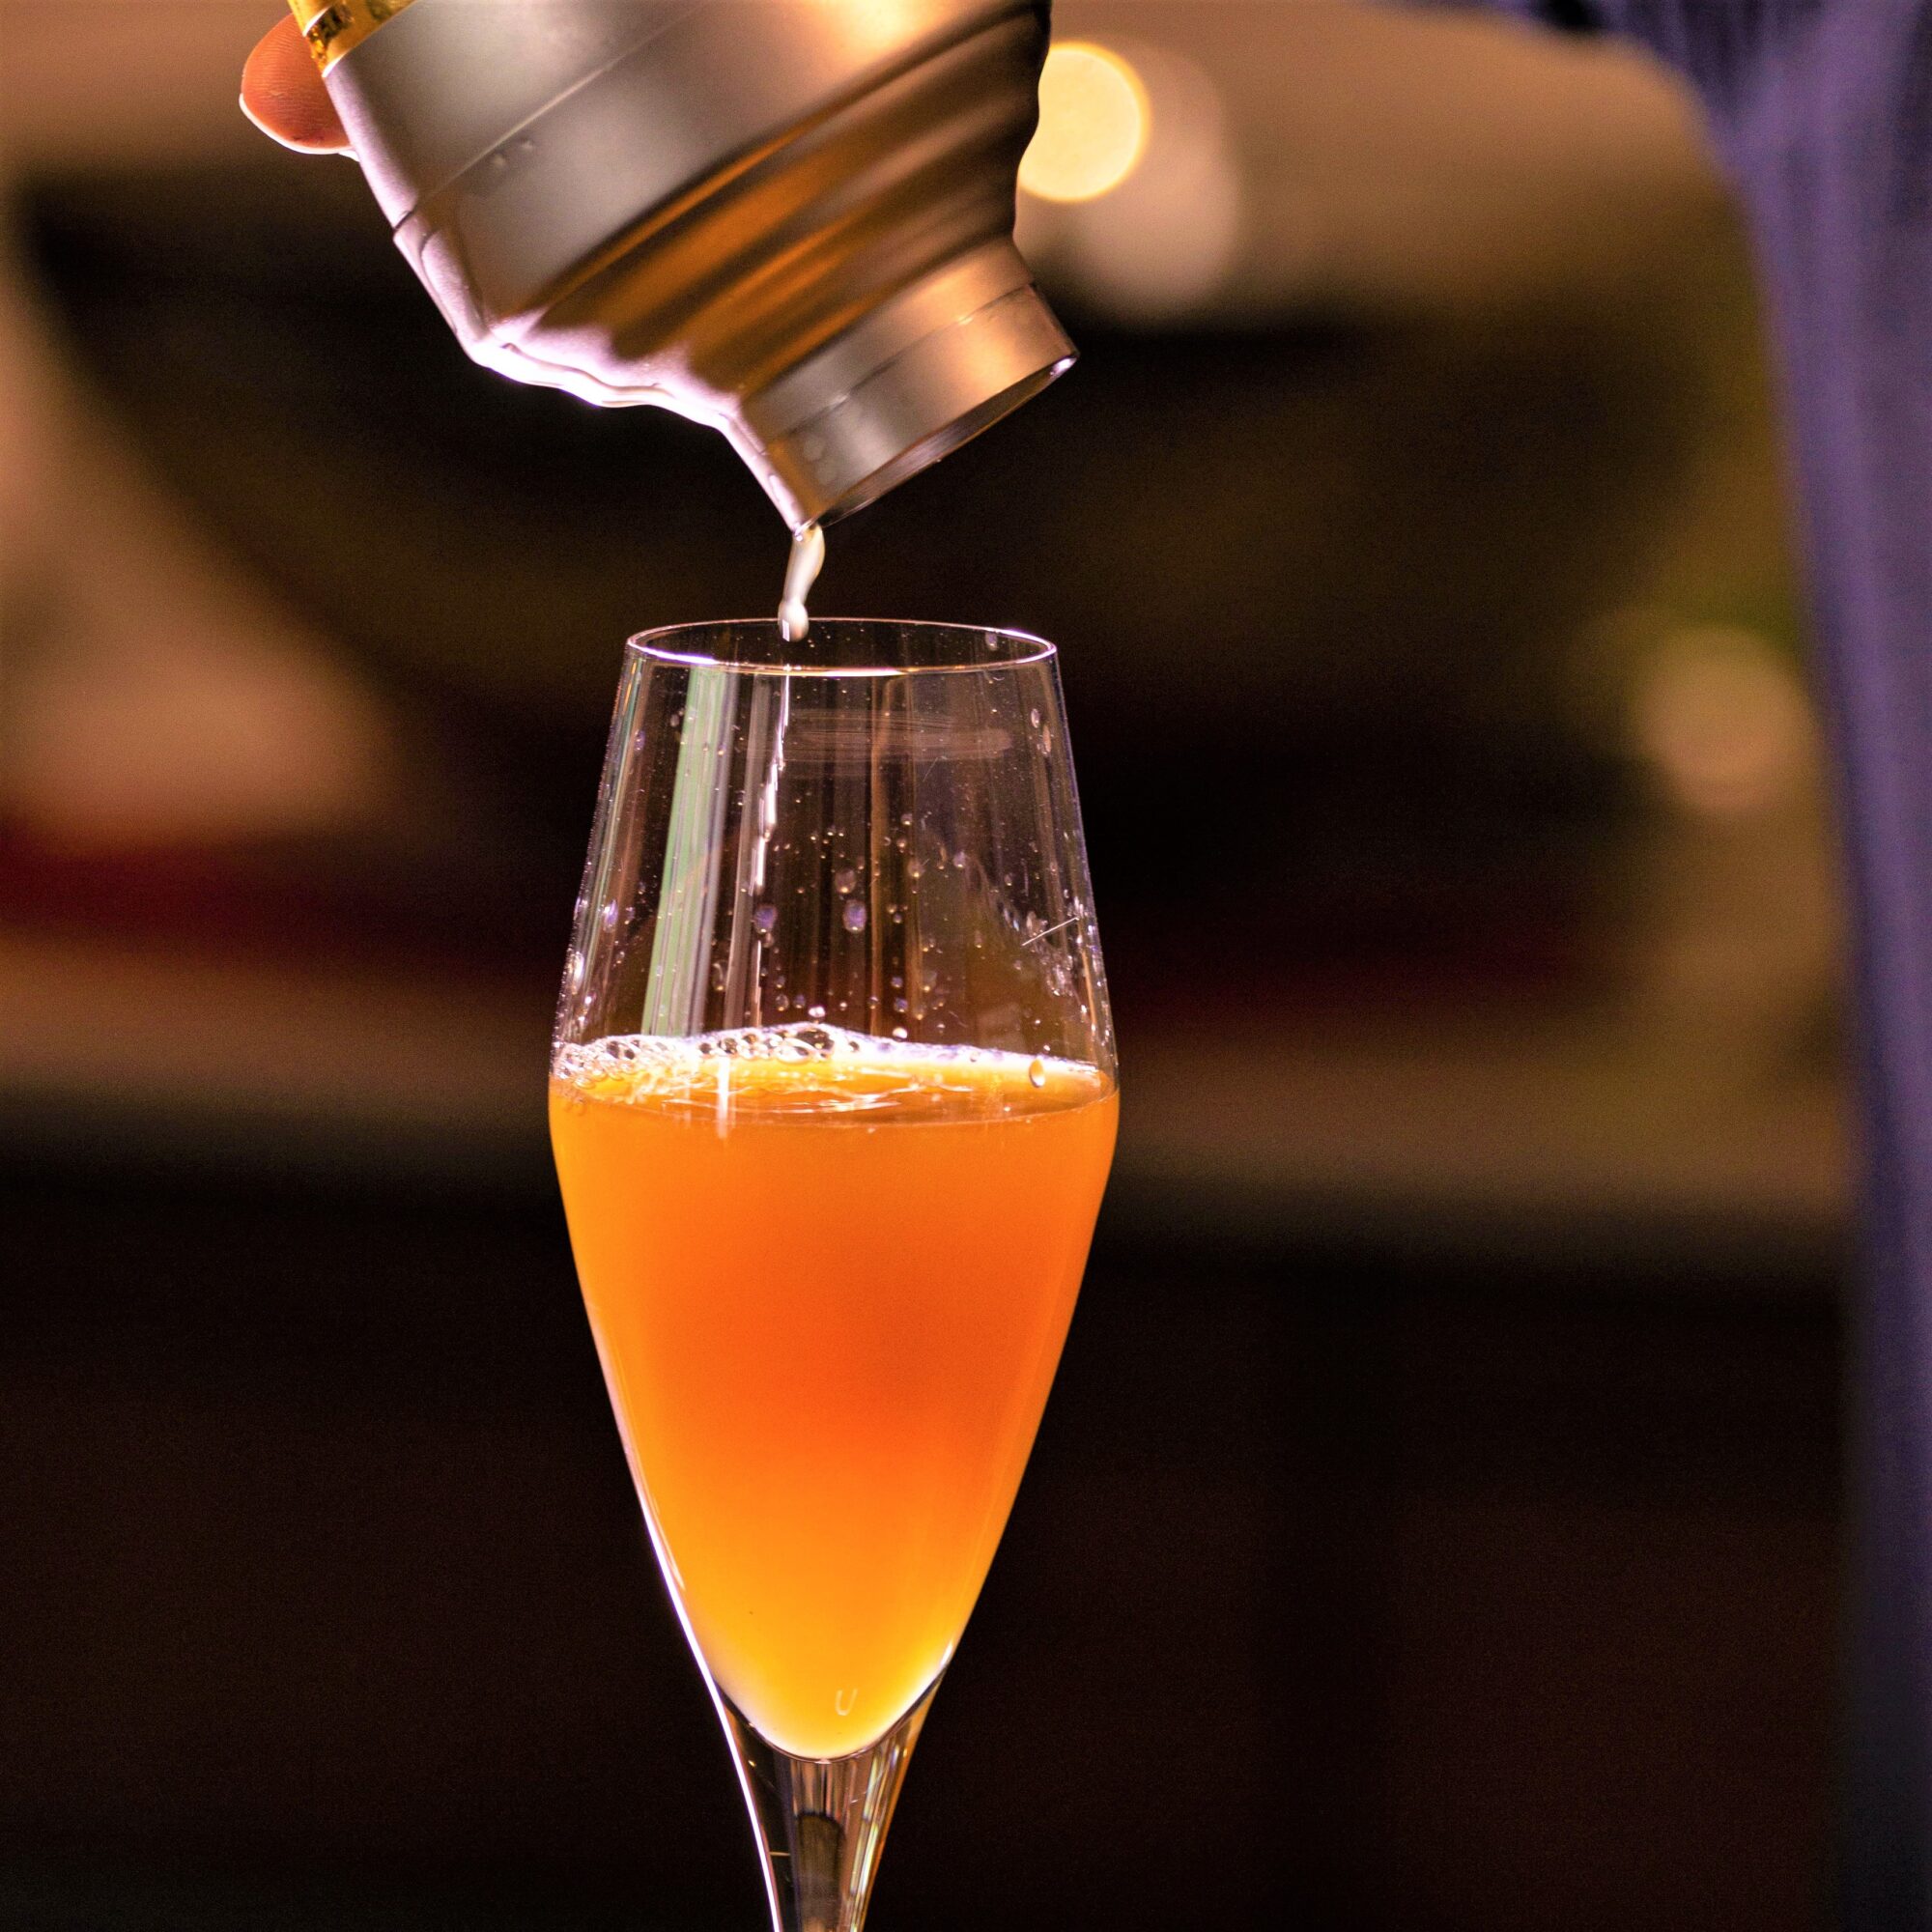 cocktail shaker pouring into glass of peach bellini